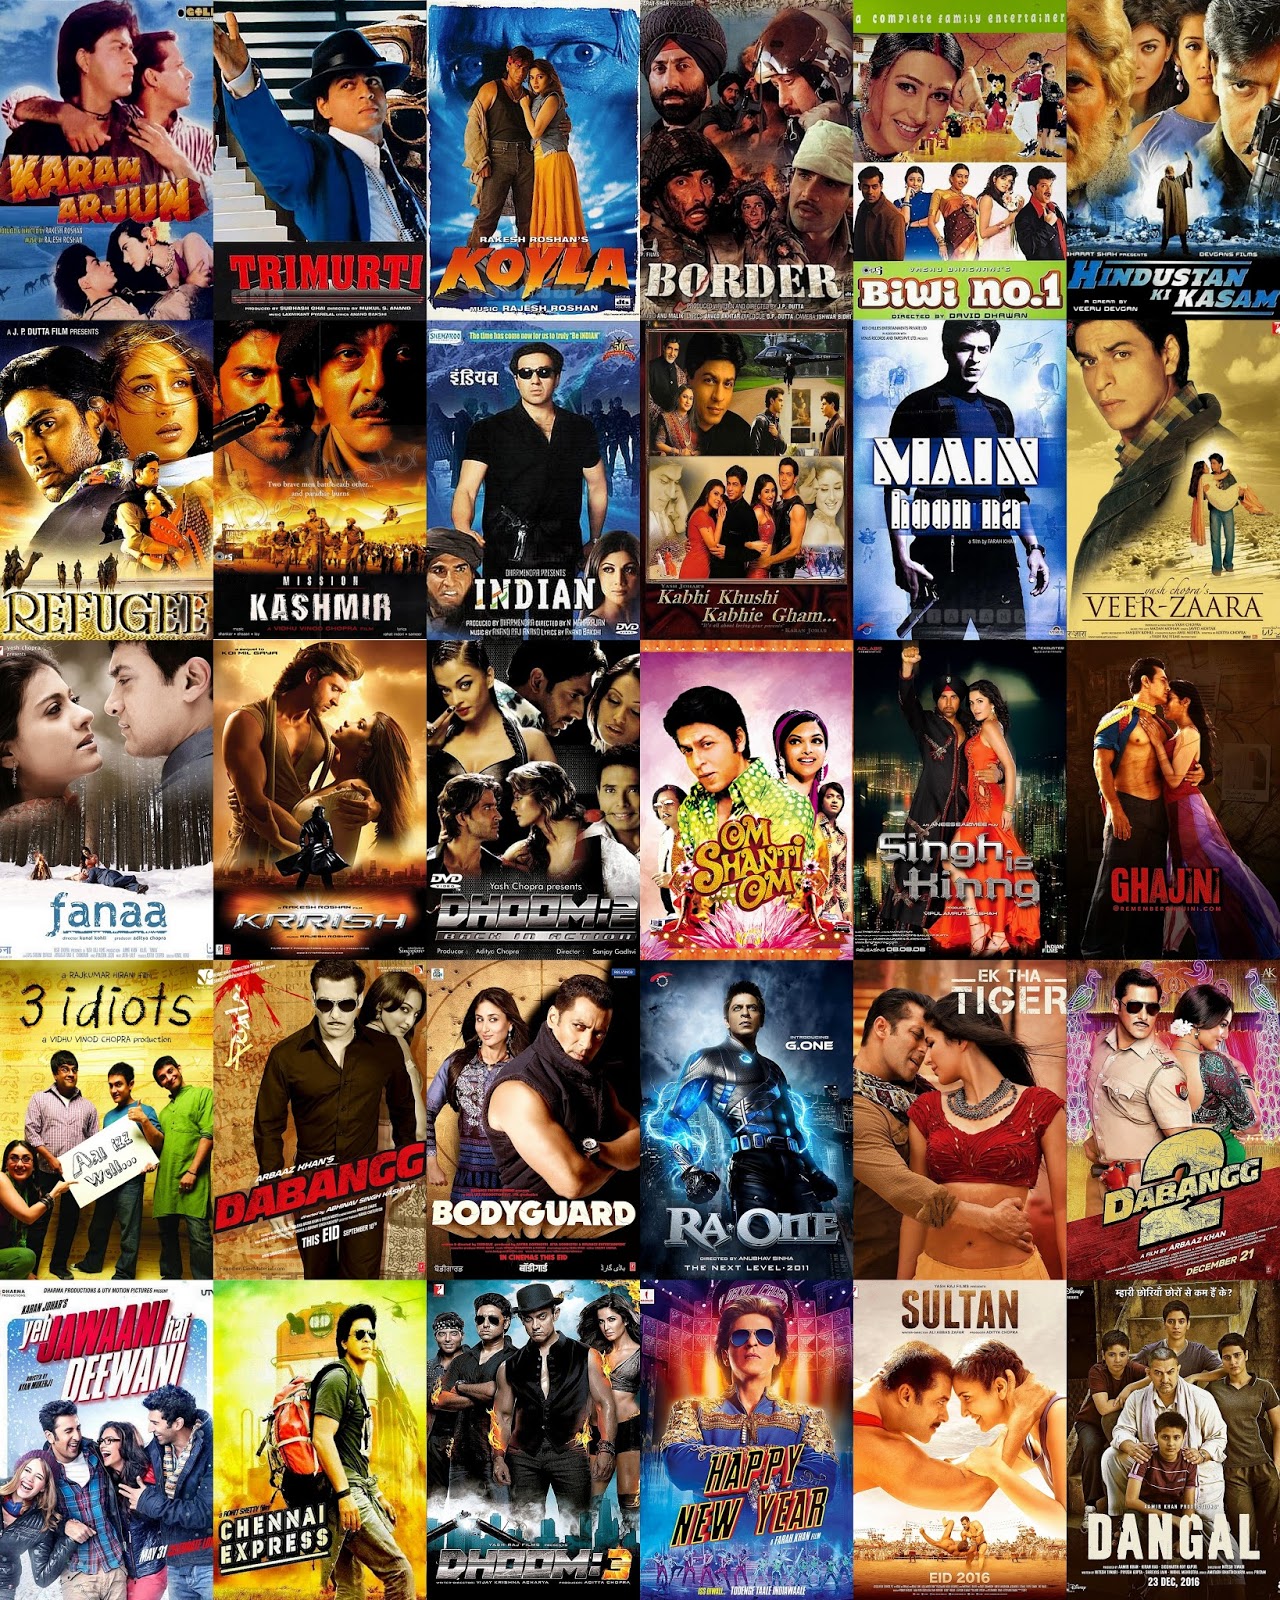 Box Office India Records: Opening Weekend Records (1994-2015)